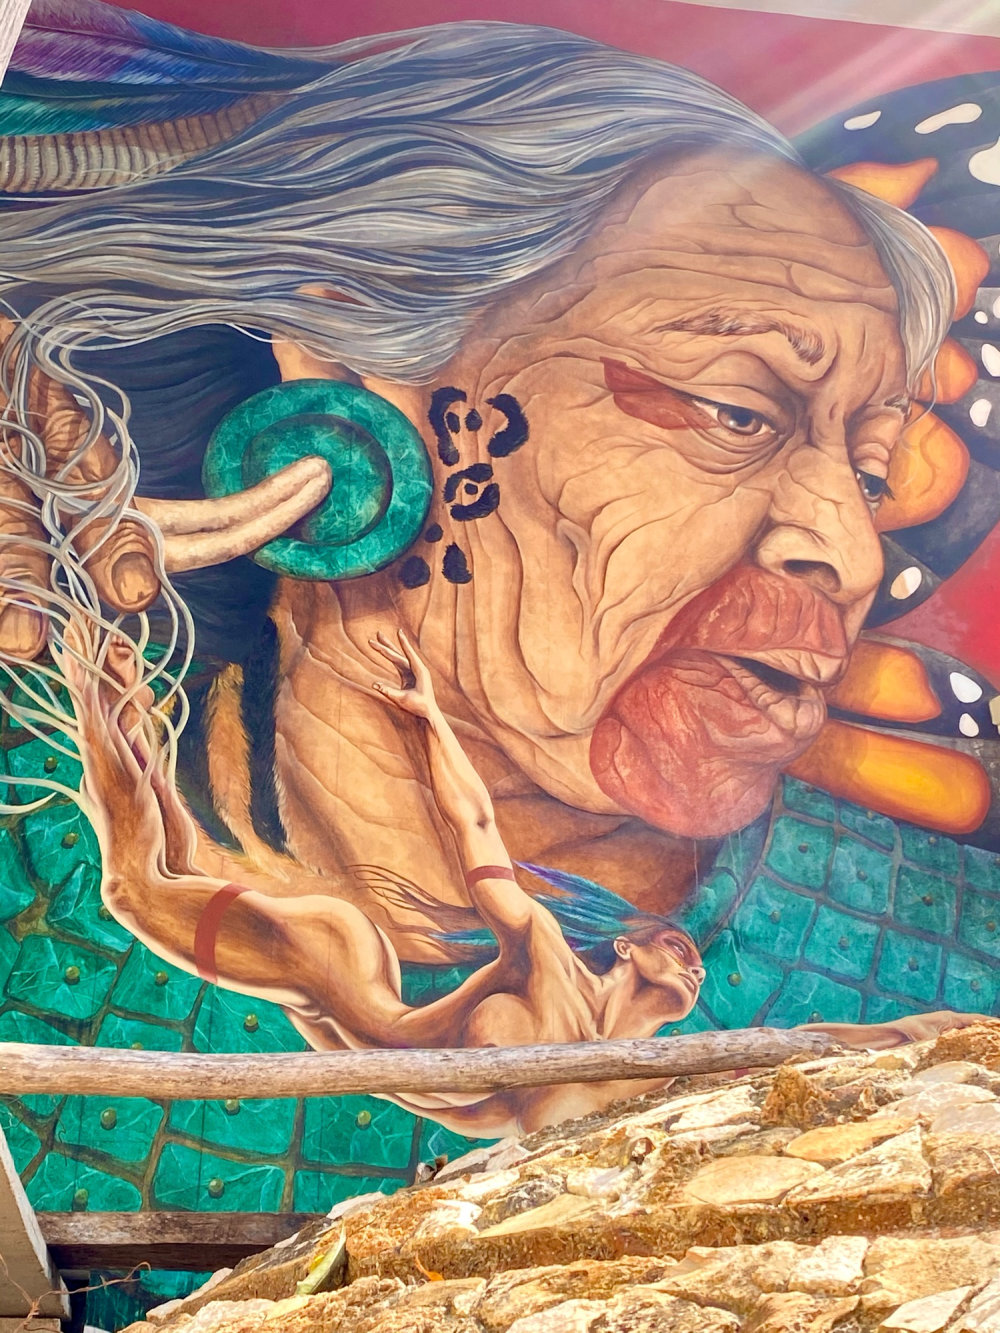 mural in Valladolid by artist unknown.